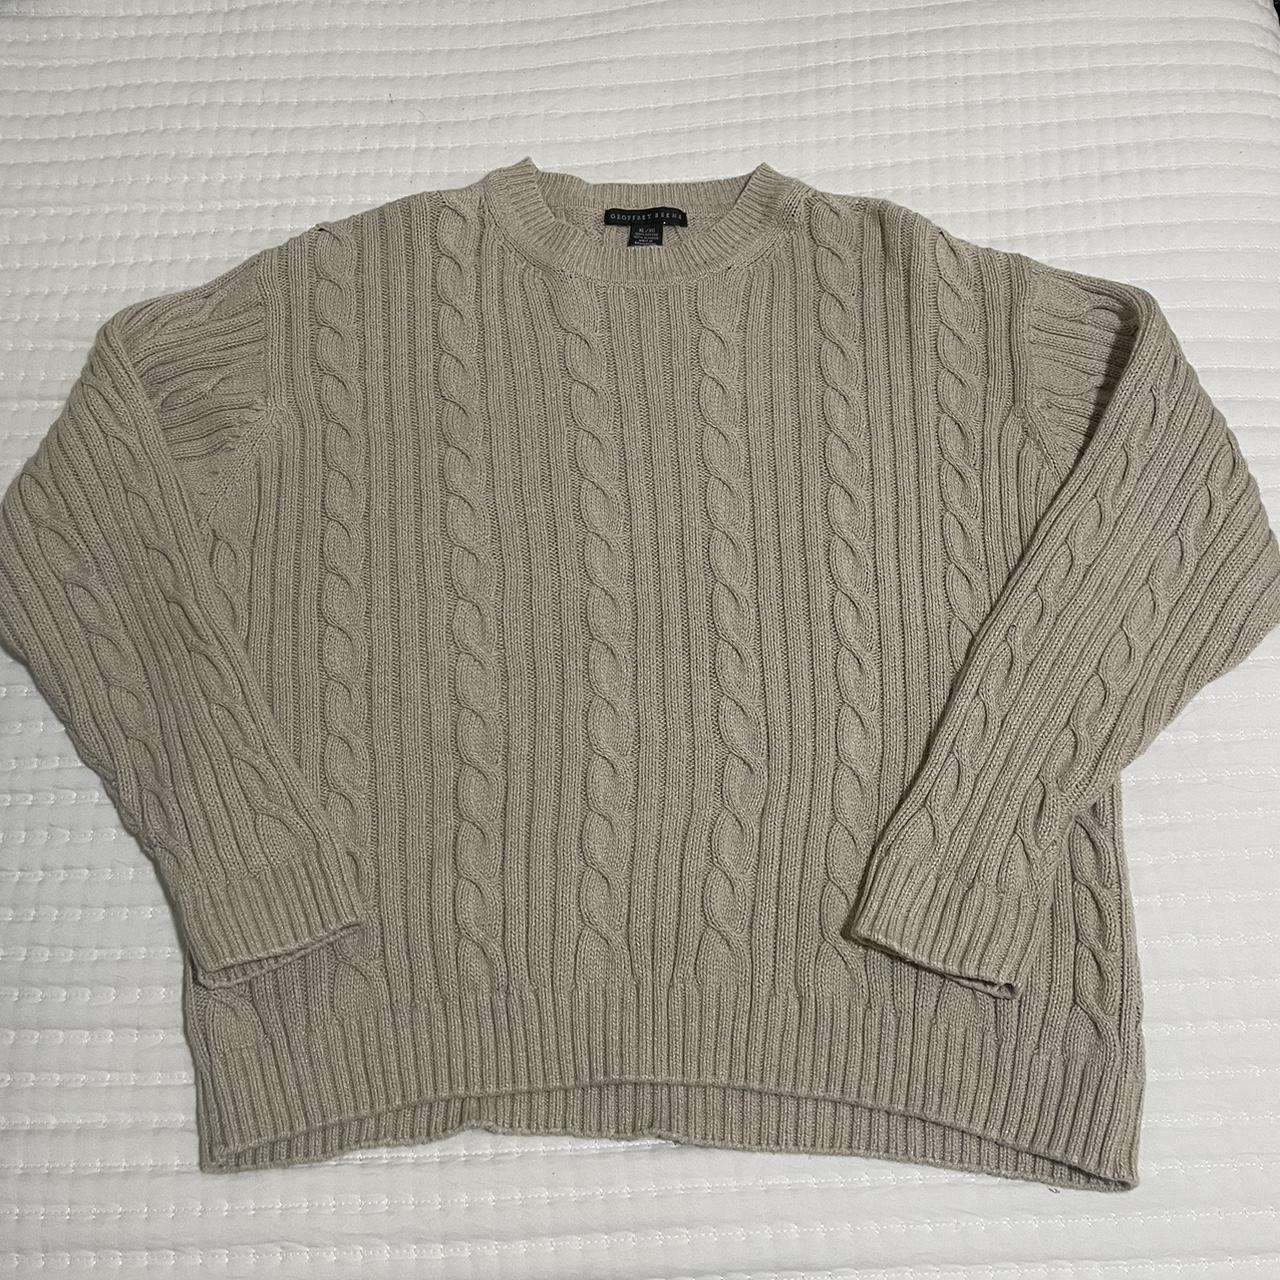 item listed by nataliesthriftshop